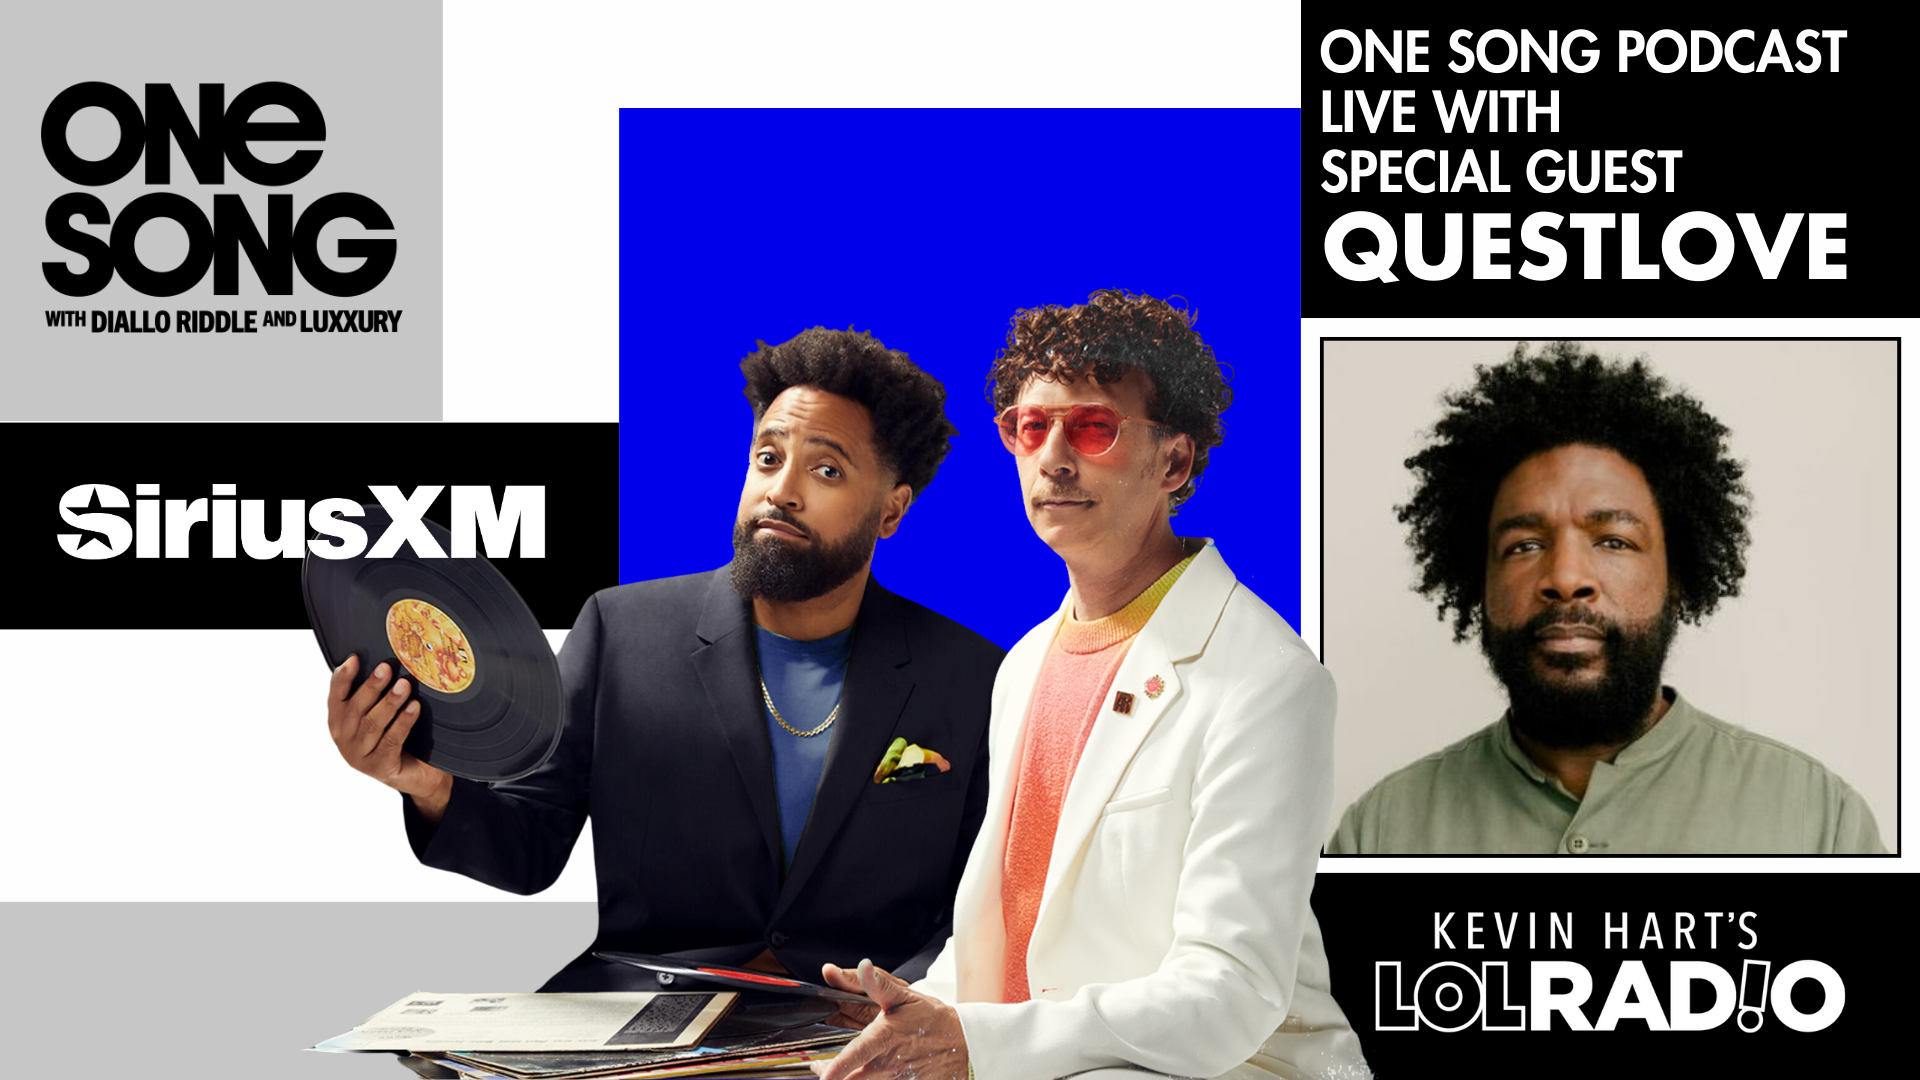 One Song, Podcast, Questlove